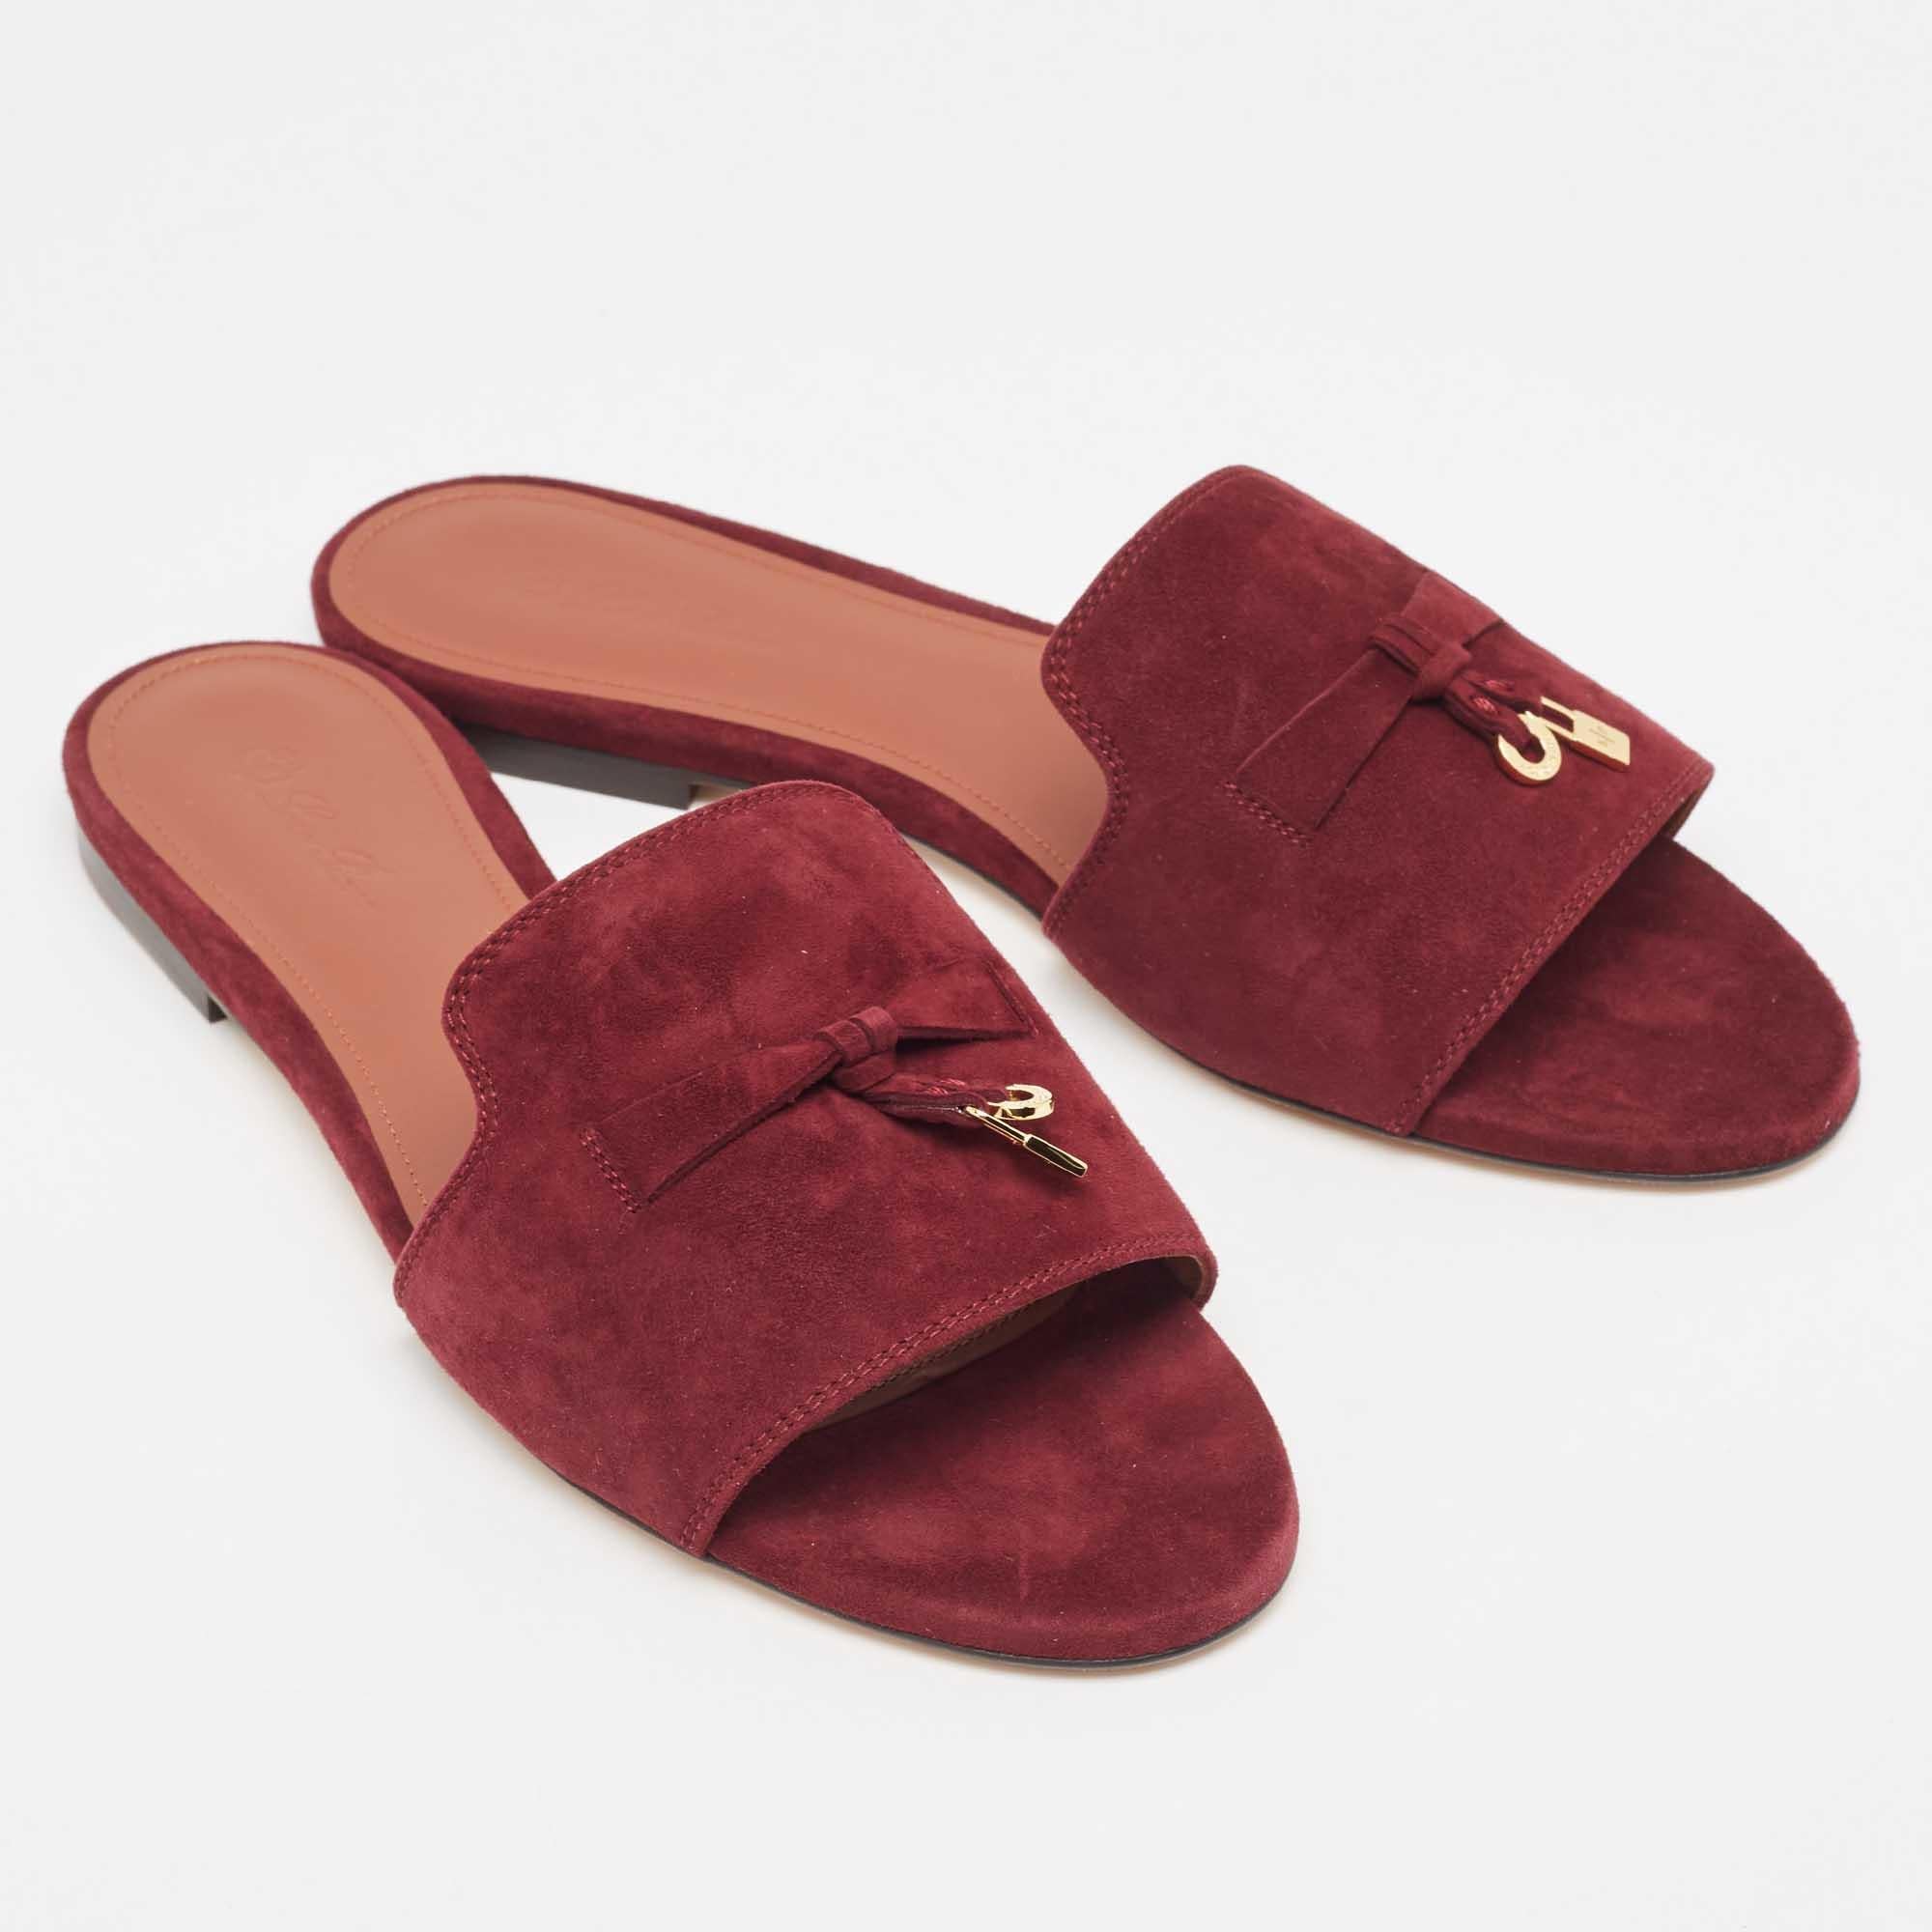 Loro Piana Burgundy Suede Summer Charms Flat Slides Size 41 1